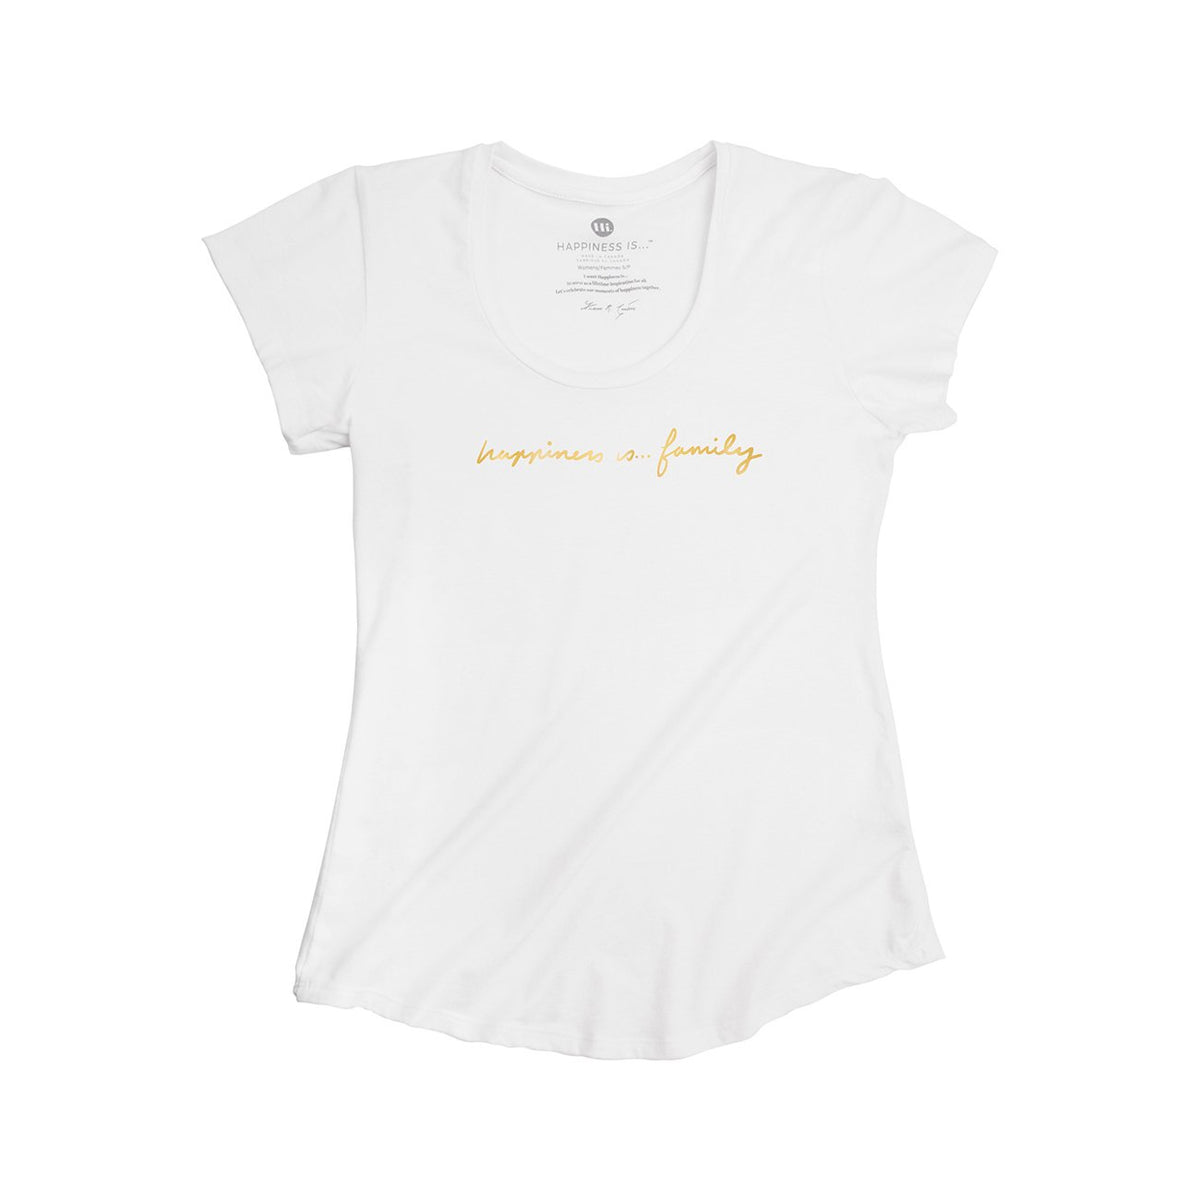 Women's Family Scoop T-Shirt, White with Gold